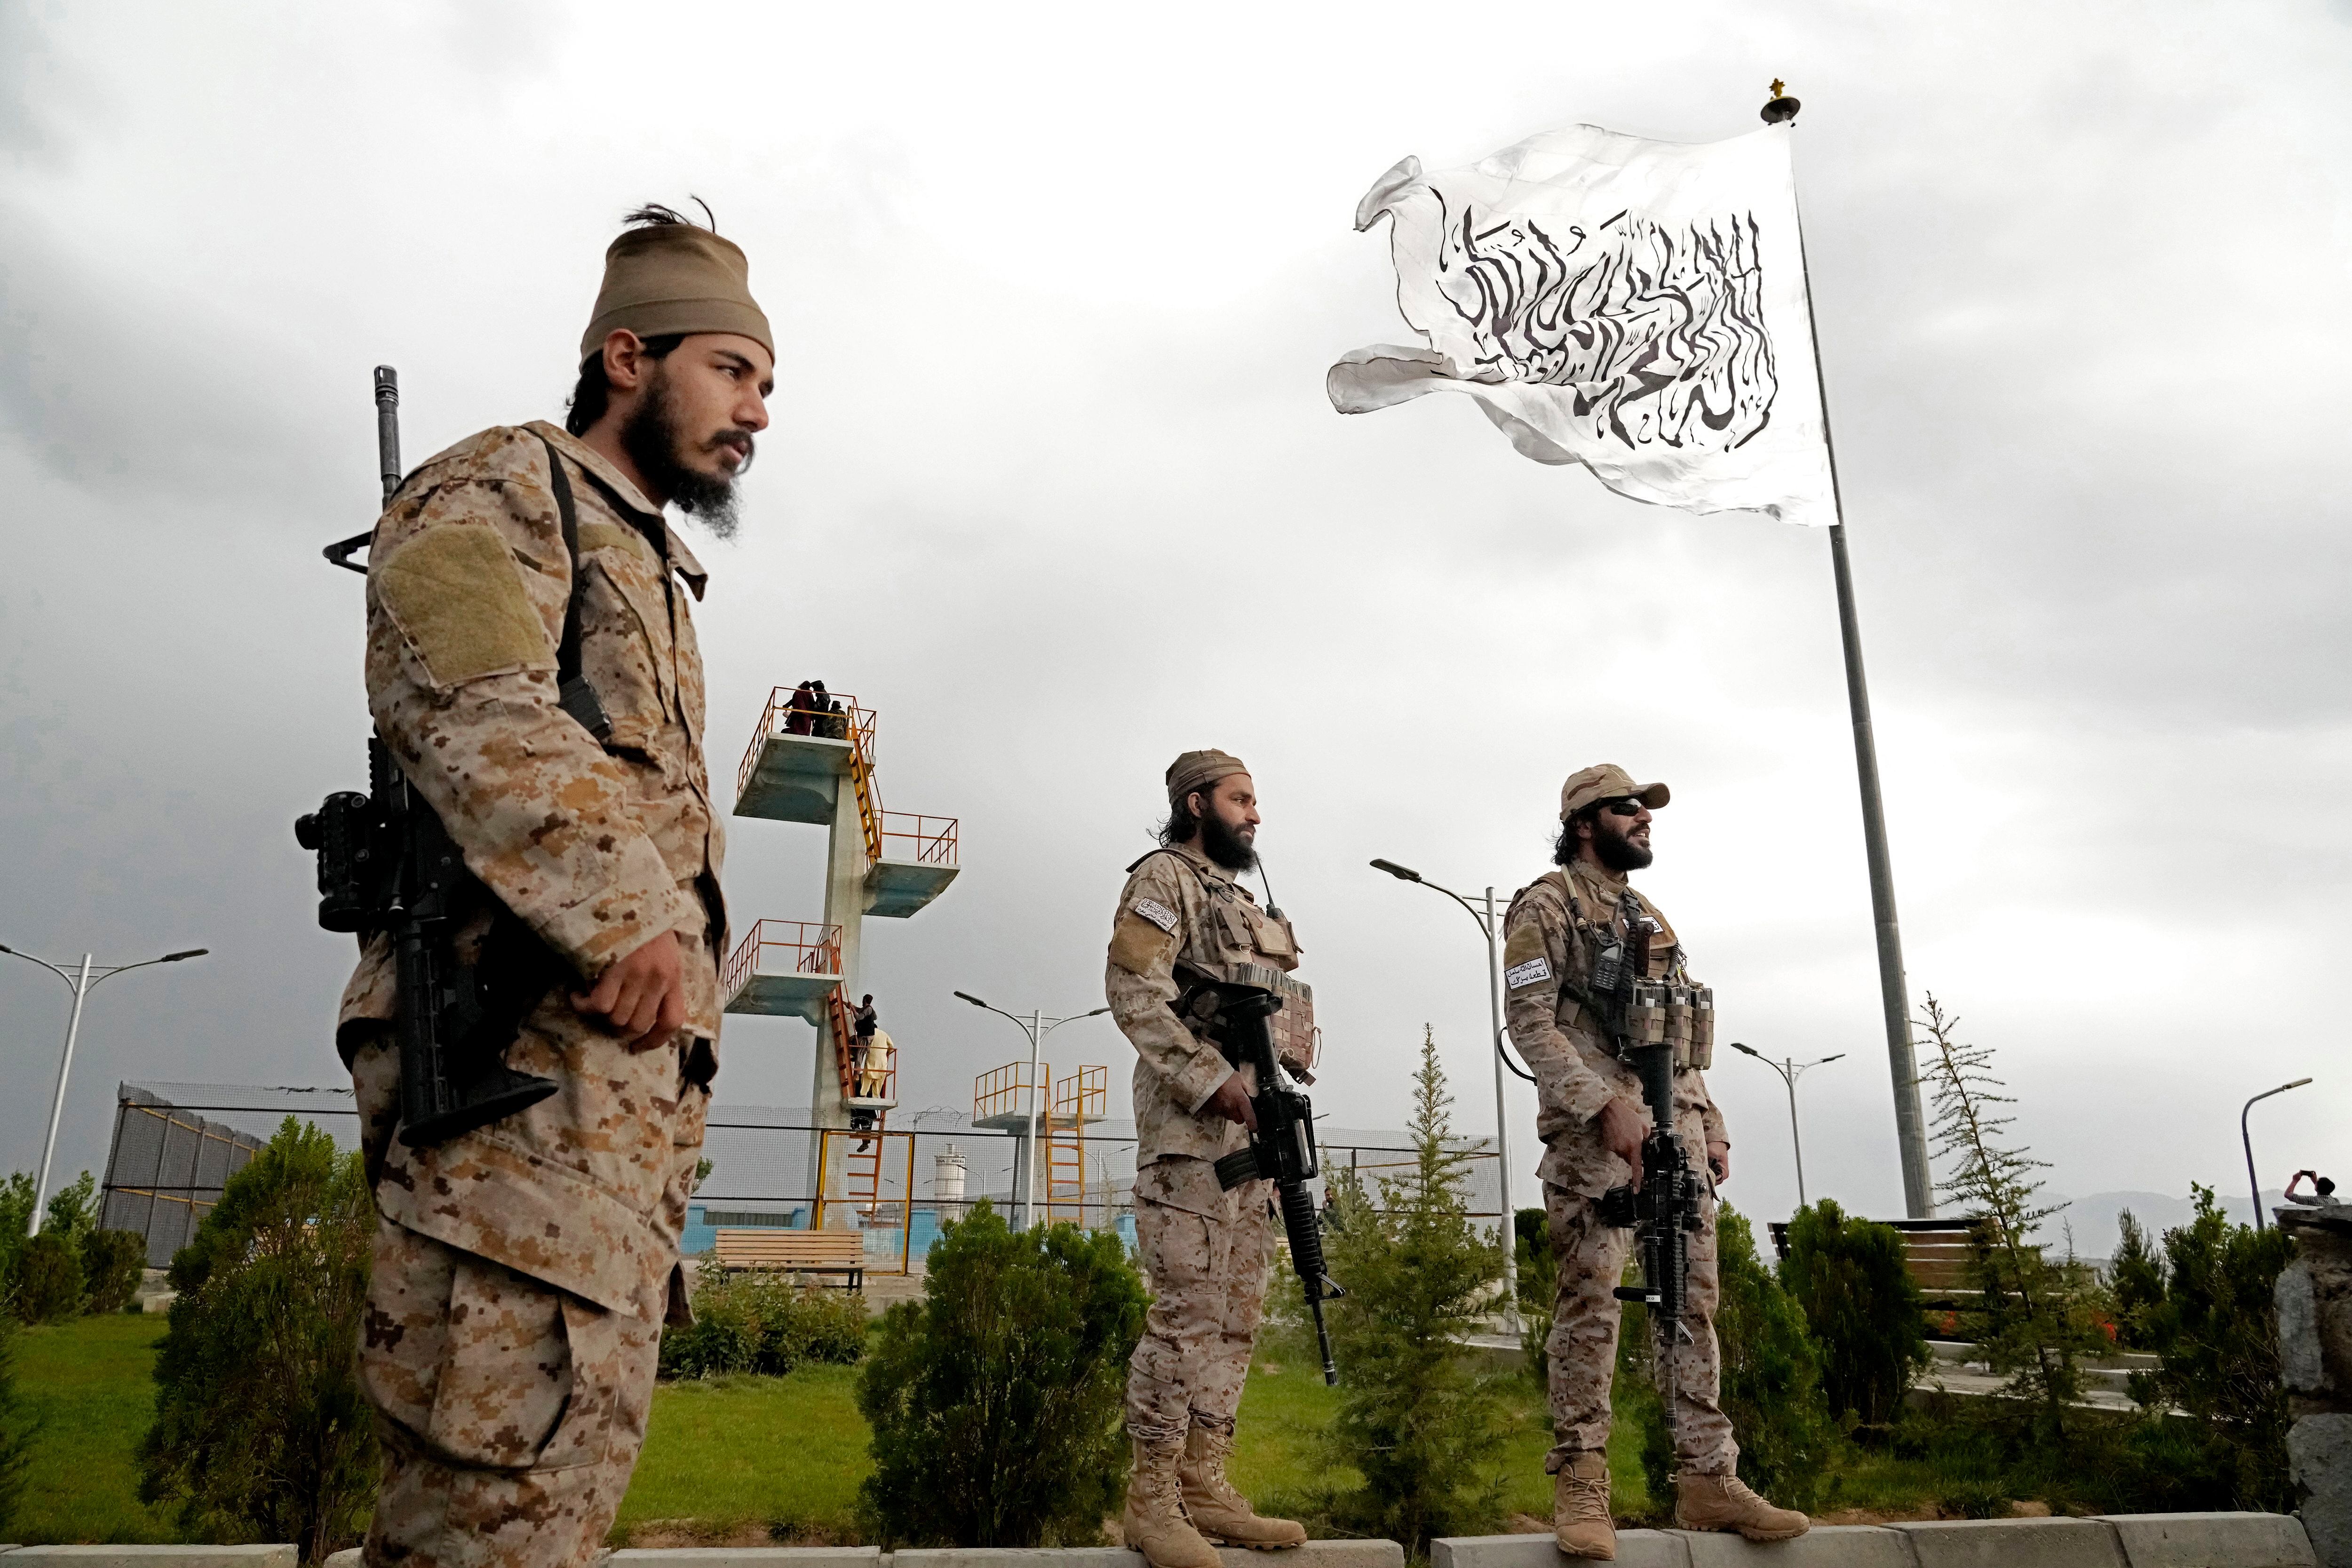 Taliban special forces stand guard in front of the Taliban flag at a park in Kabul, Afghanistan, Monday, April 18, 2022. (AP Photo/Ebrahim Noroozi)